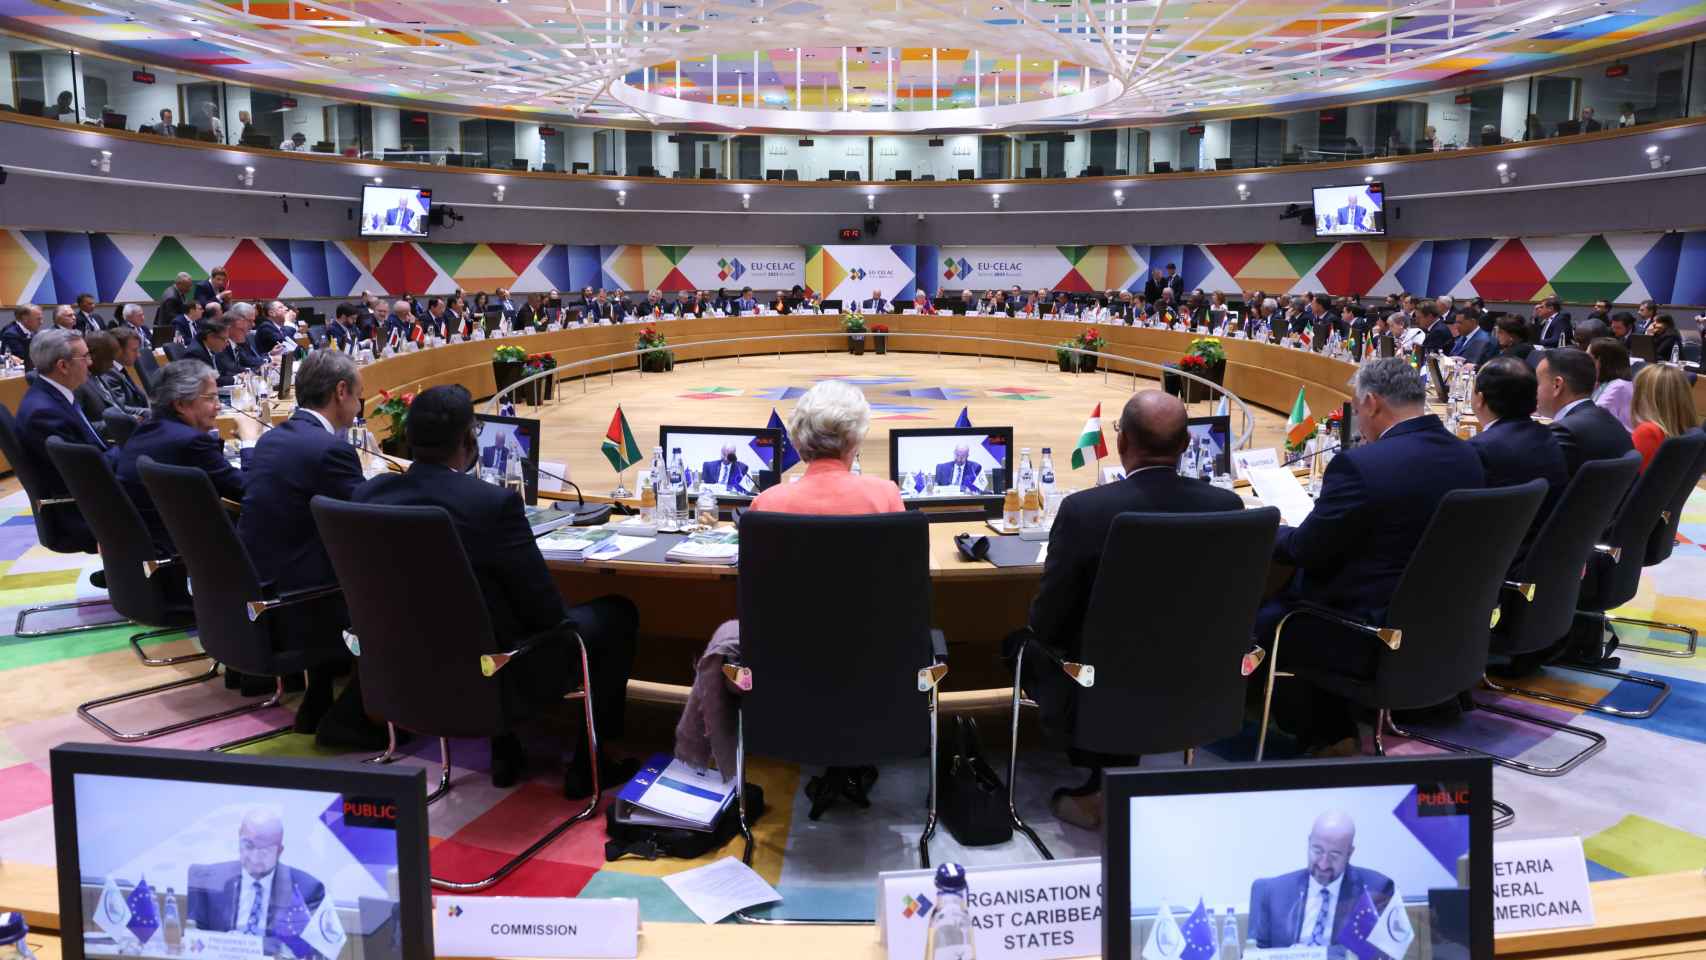 The inaugural session of the EU-Latin America summit has brought together 60 leaders from both sides of the Atlantic